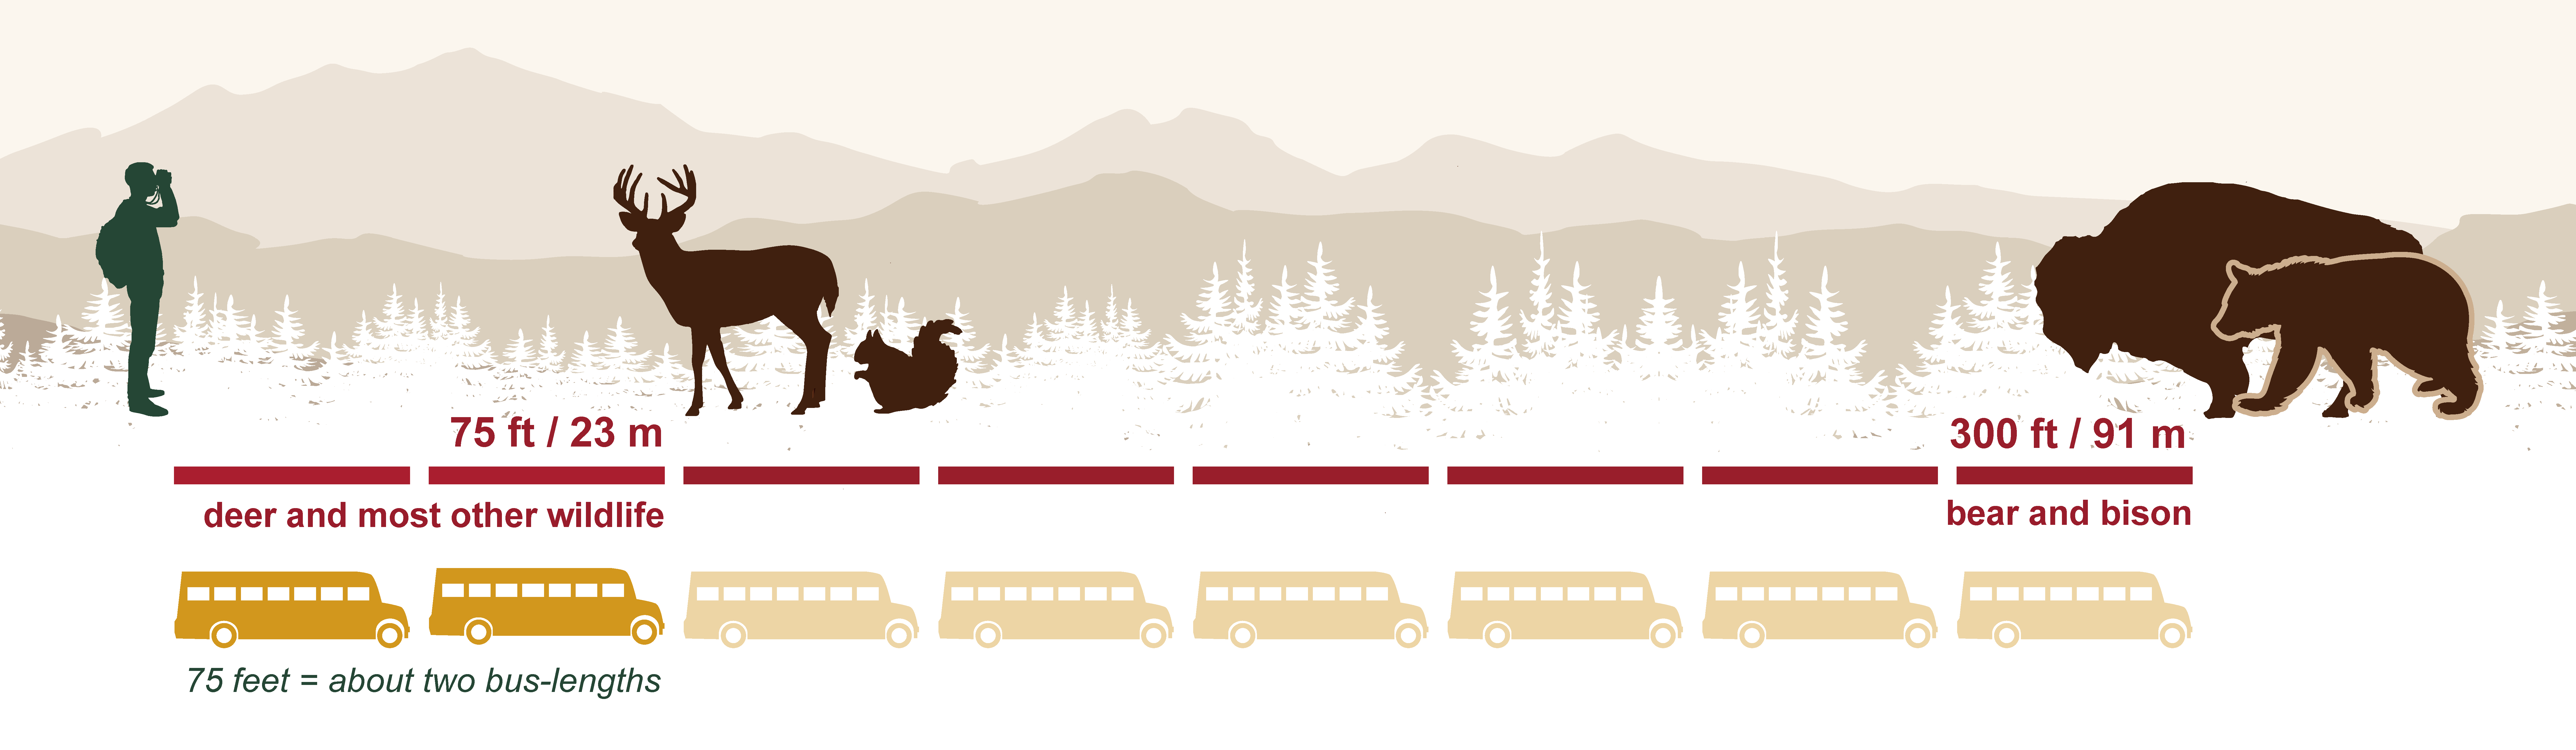 An infographic of a person staying 75 feet away from a deer and squirrel and 300 feet from a bear and bison. Images of the length of 2 school buses are below to indicate a way to measure about 75 feet and 8 school buses to measure about 300 feet.